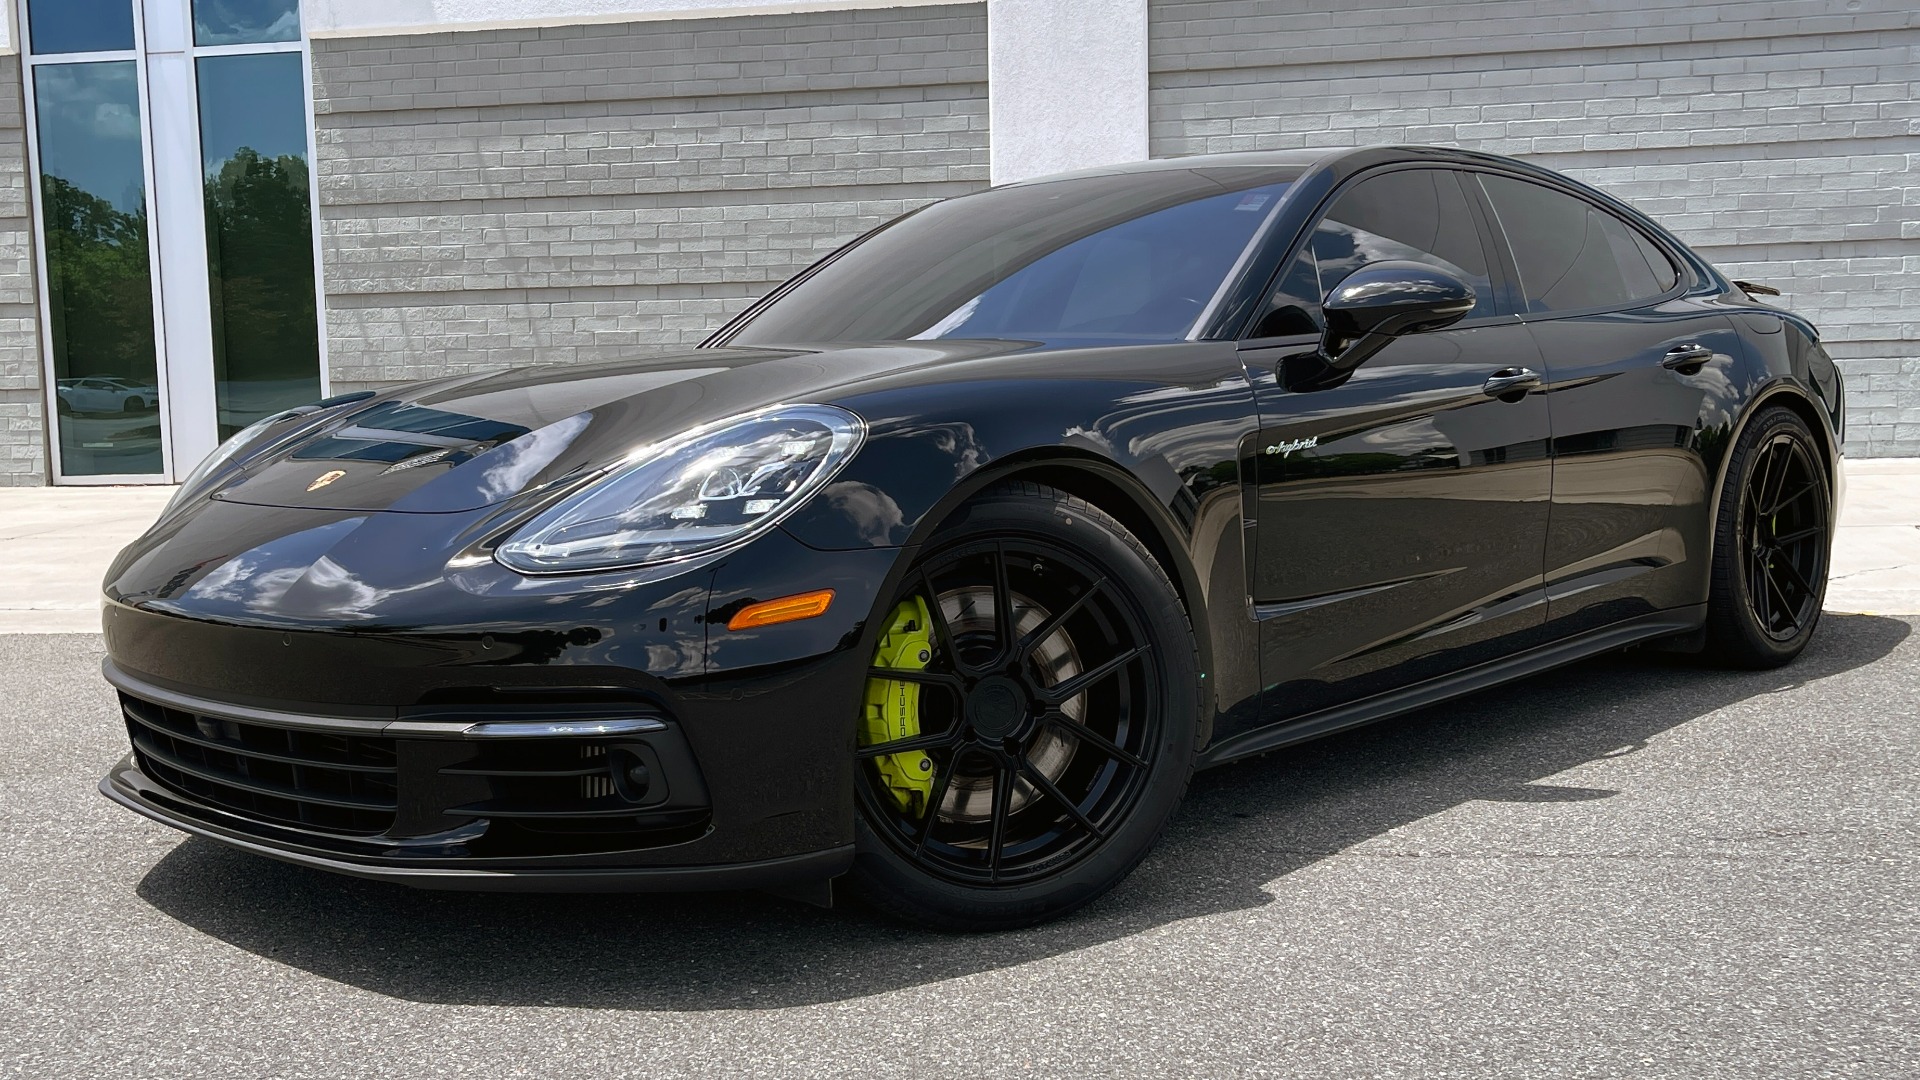 Used 2018 Porsche Panamera 4 E-Hybrid for sale $52,000 at Formula Imports in Charlotte NC 28227 1